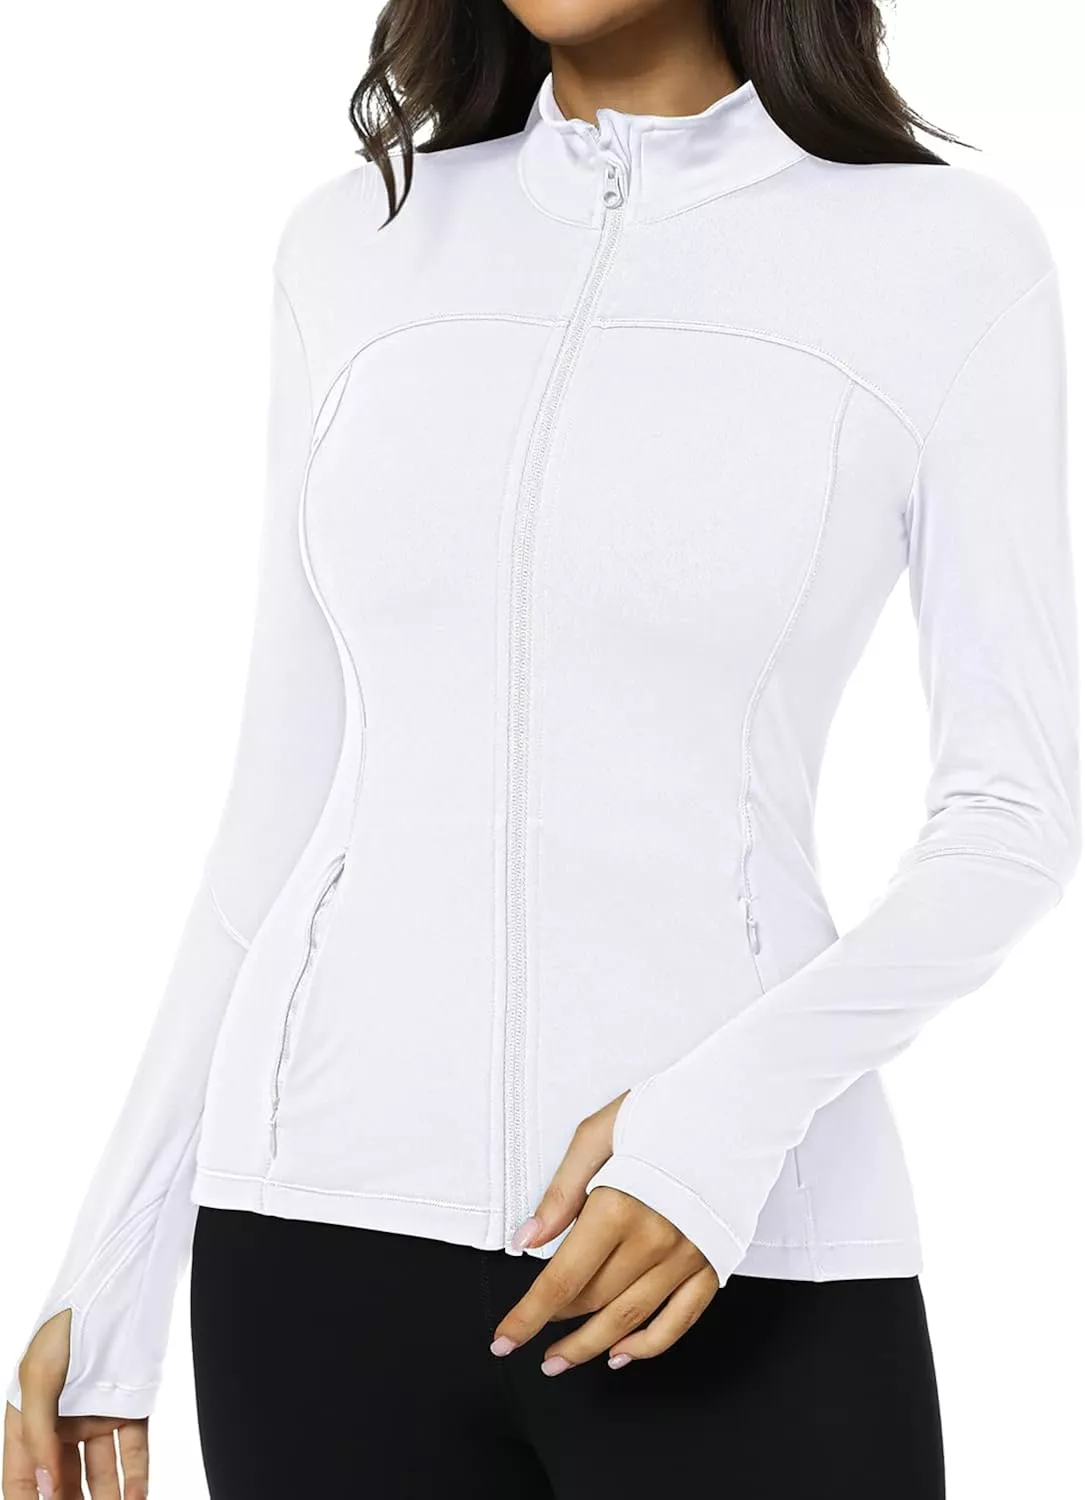 CRZ YOGA Winter Butterluxe Womens Cropped Slim Fit Workout Jackets -  Weightless Track Athletic Full Zip Jacket